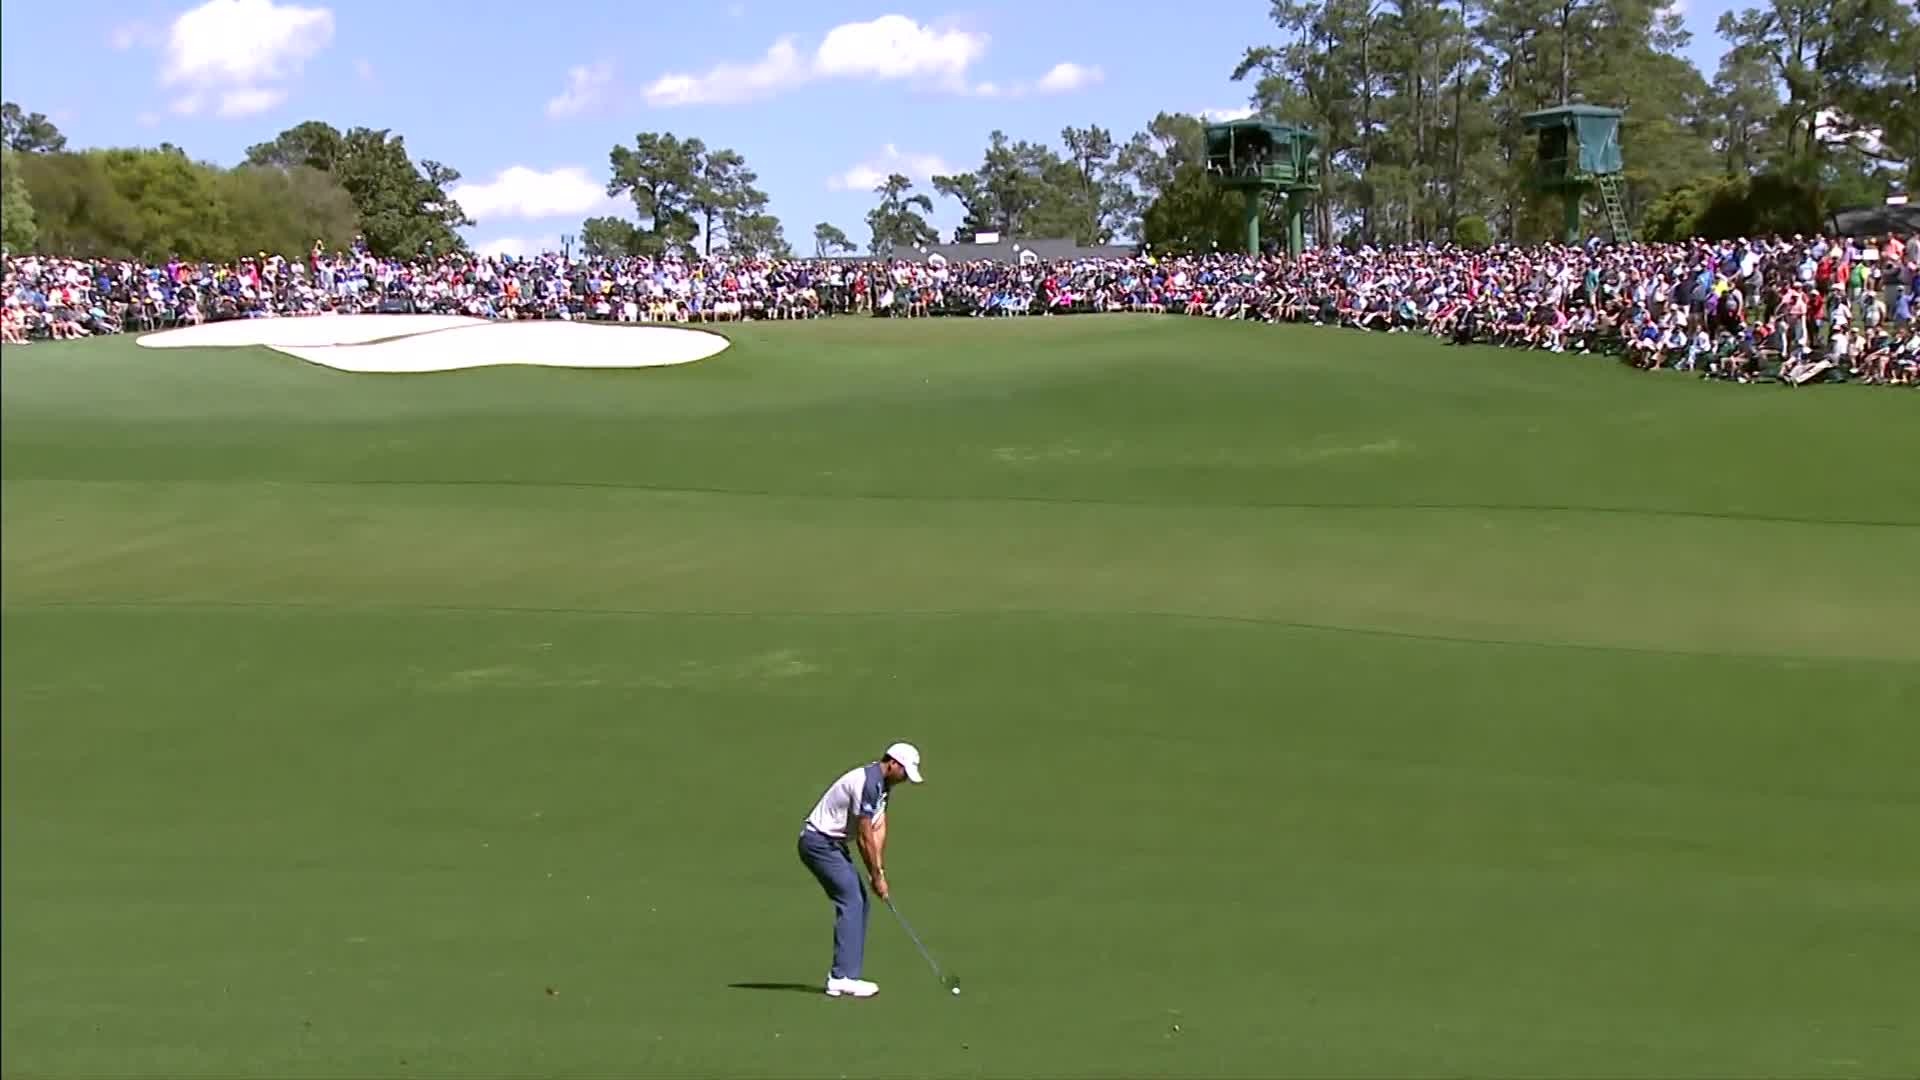 Watch a selection of the best shots from the opening round Masters